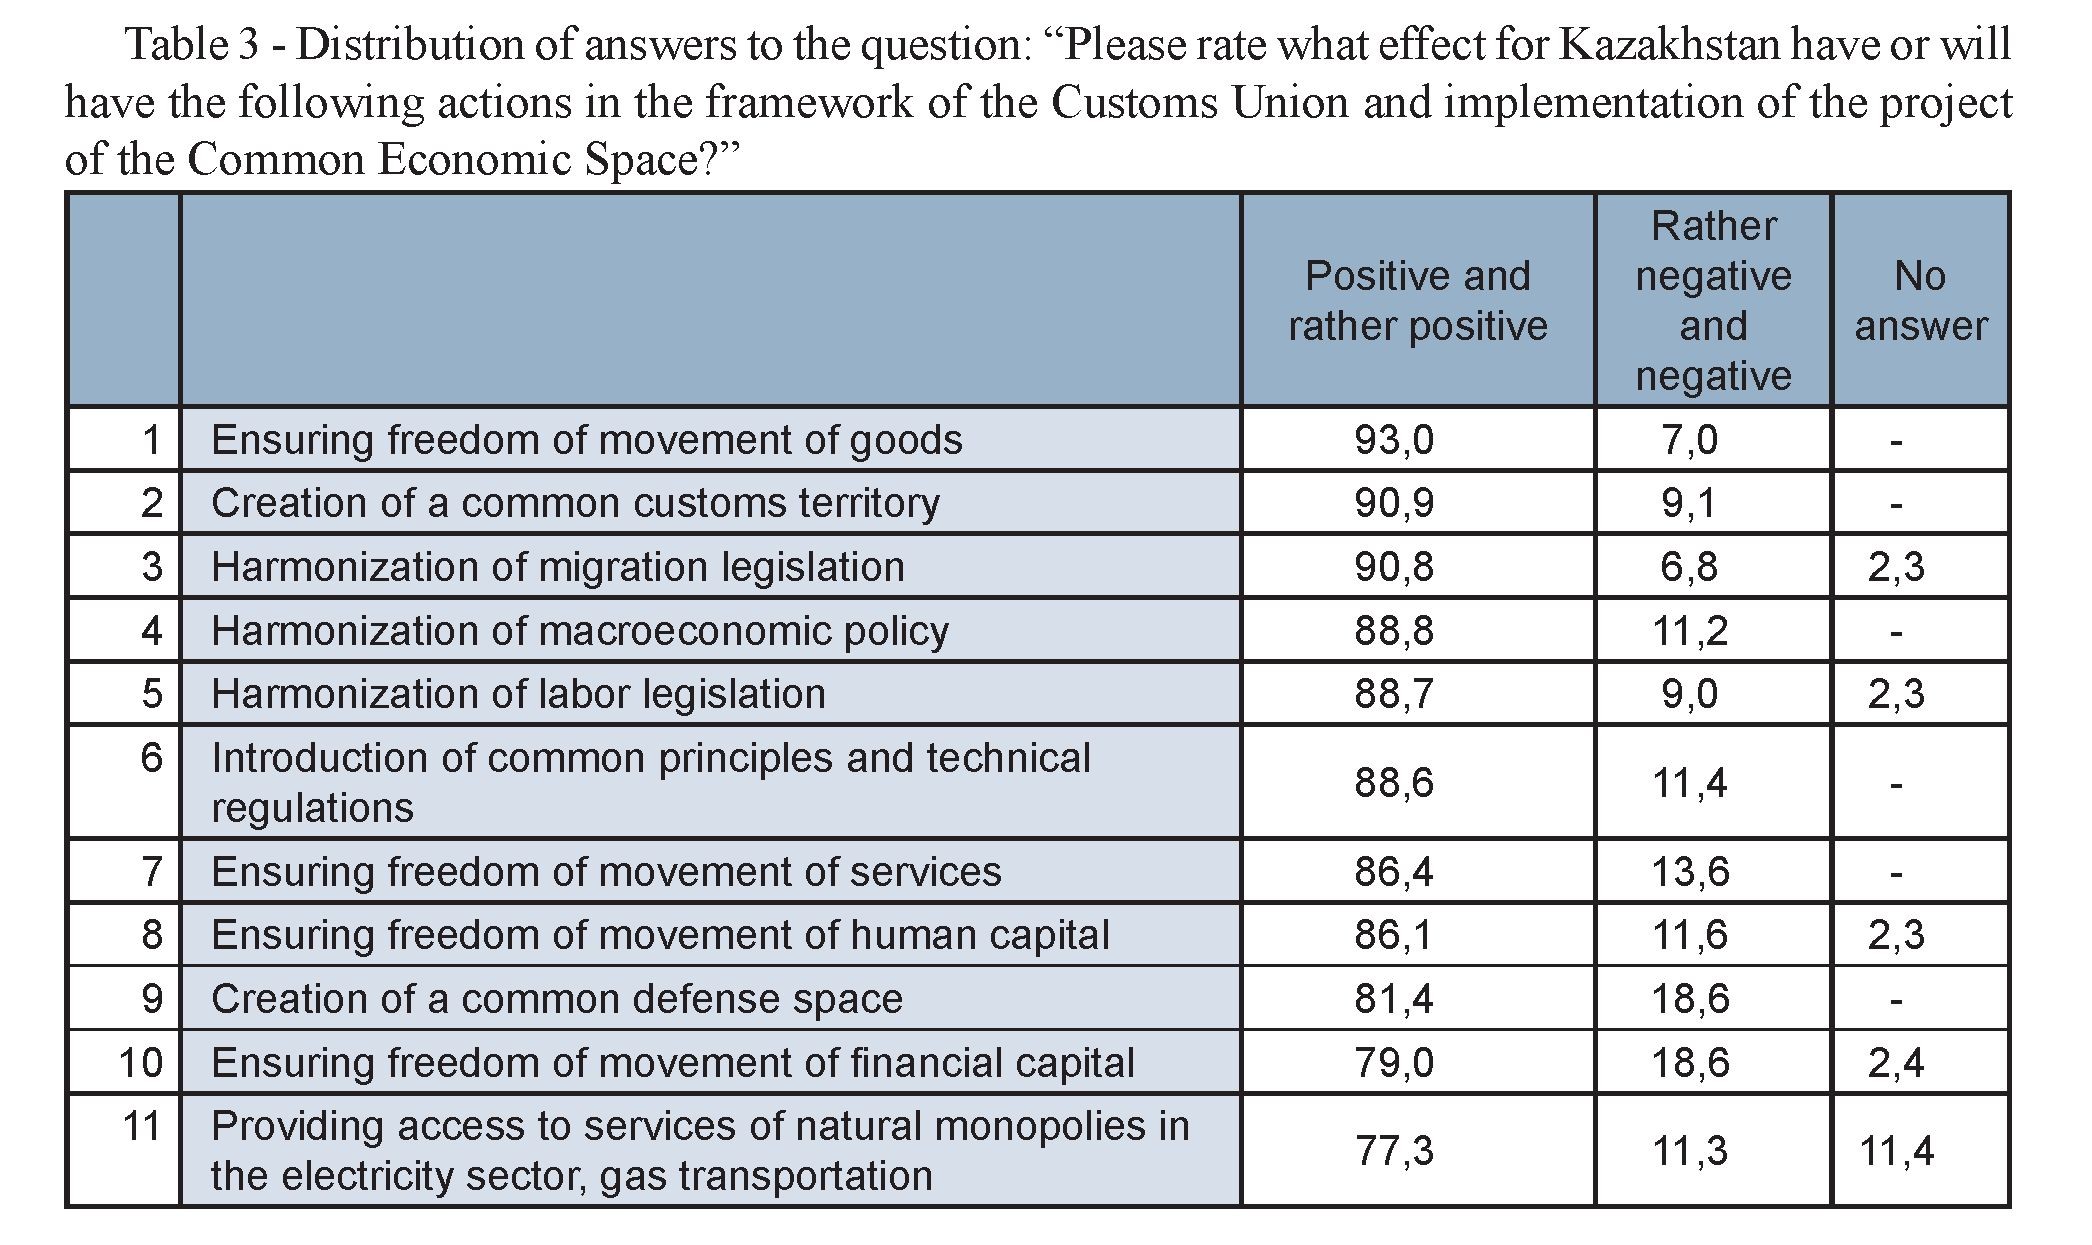 Perception of the eurasian integration as a factor of improving the competitiveness of kazakhstan by the public and the experts